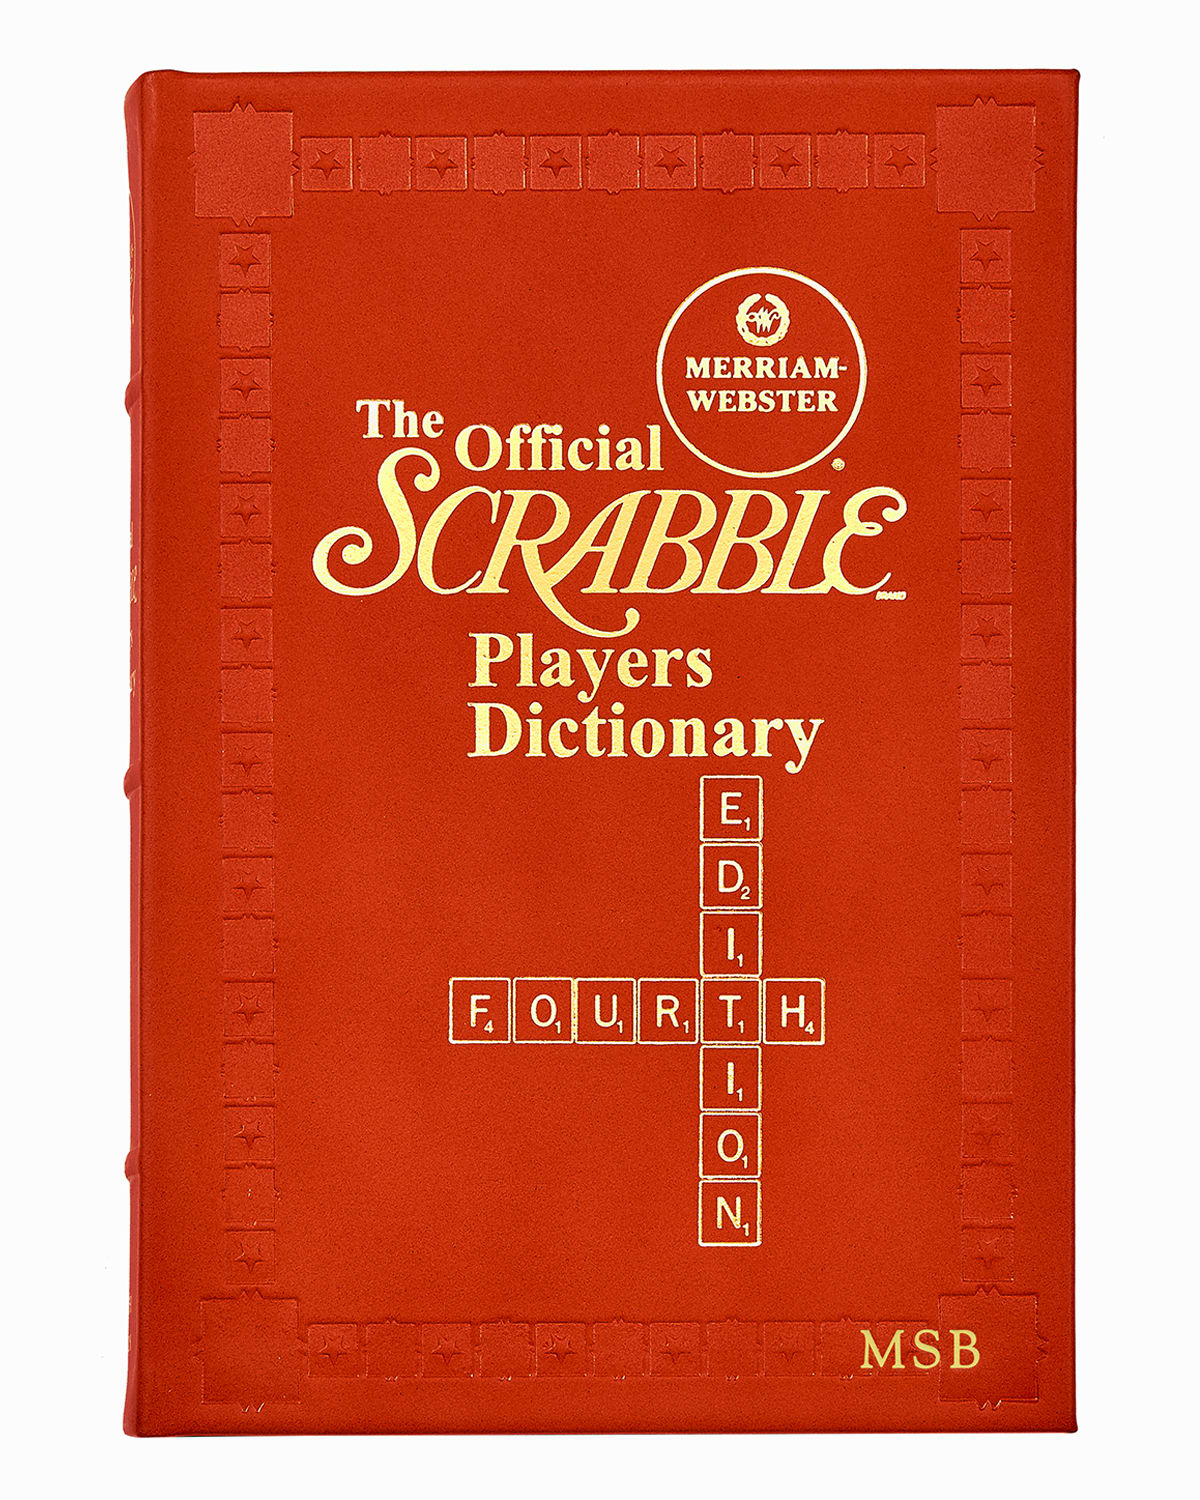 Shop Graphic Image The Official Merriam-webster Scrabble Players Dictionary, Fourth Edition, Personalized In Red